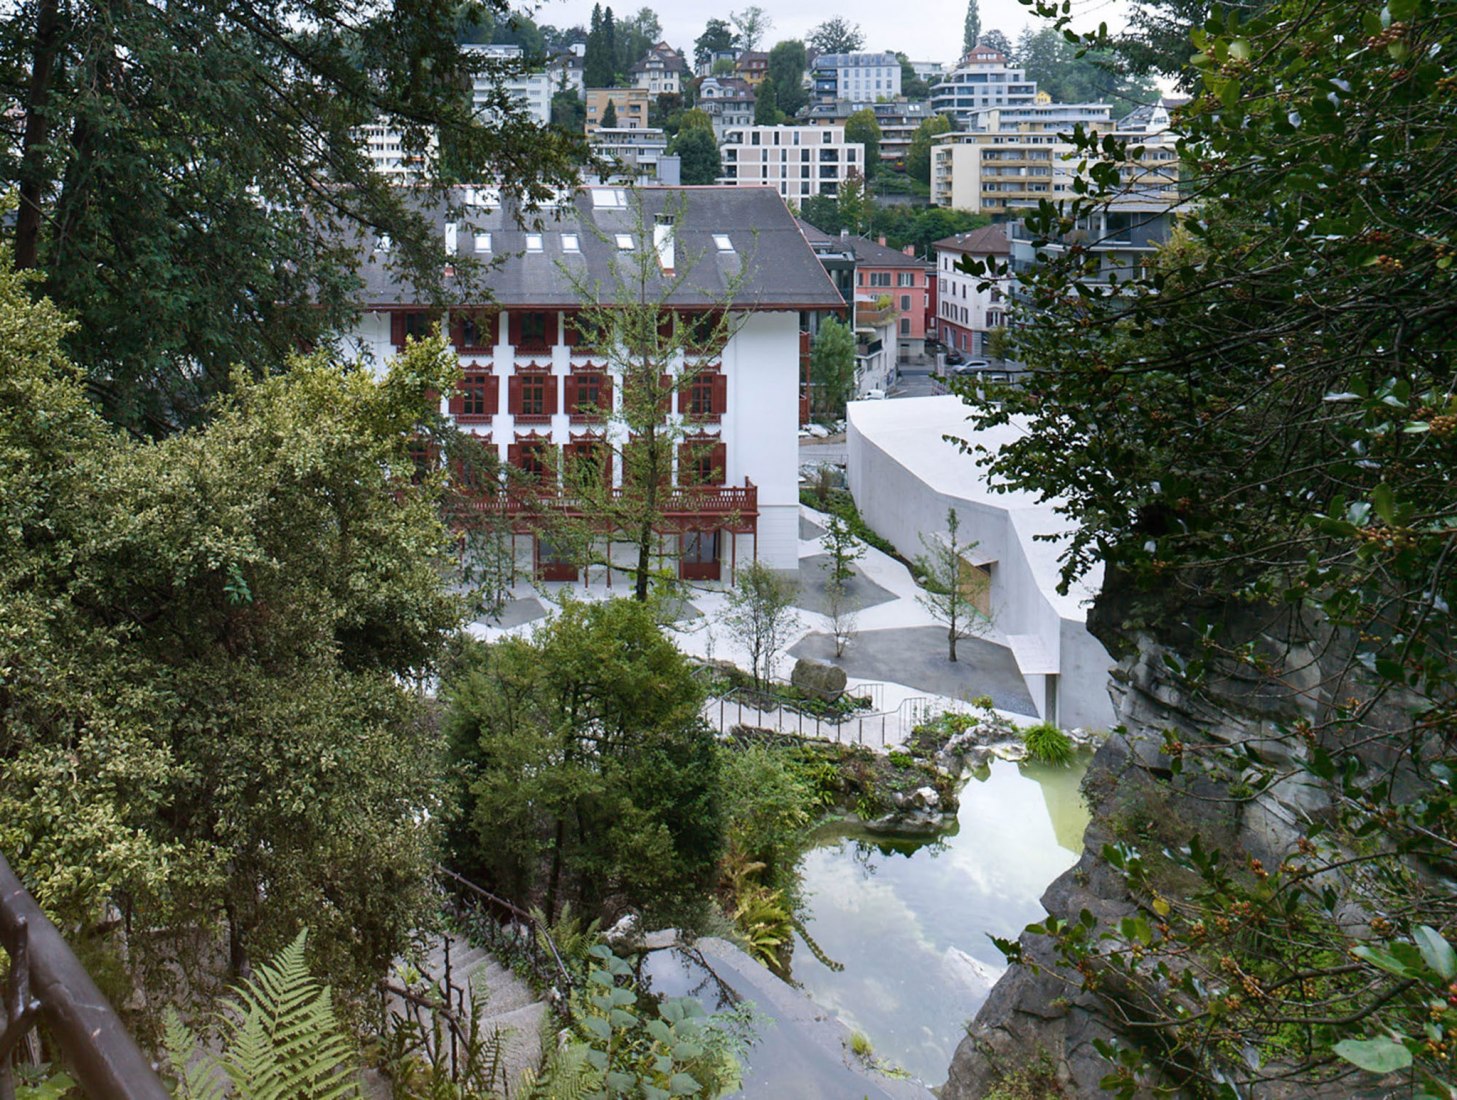 Renovation and adaptation of the Lucer Glacier Garden by Miller & Maranta. Photograph by Ruedi Walti